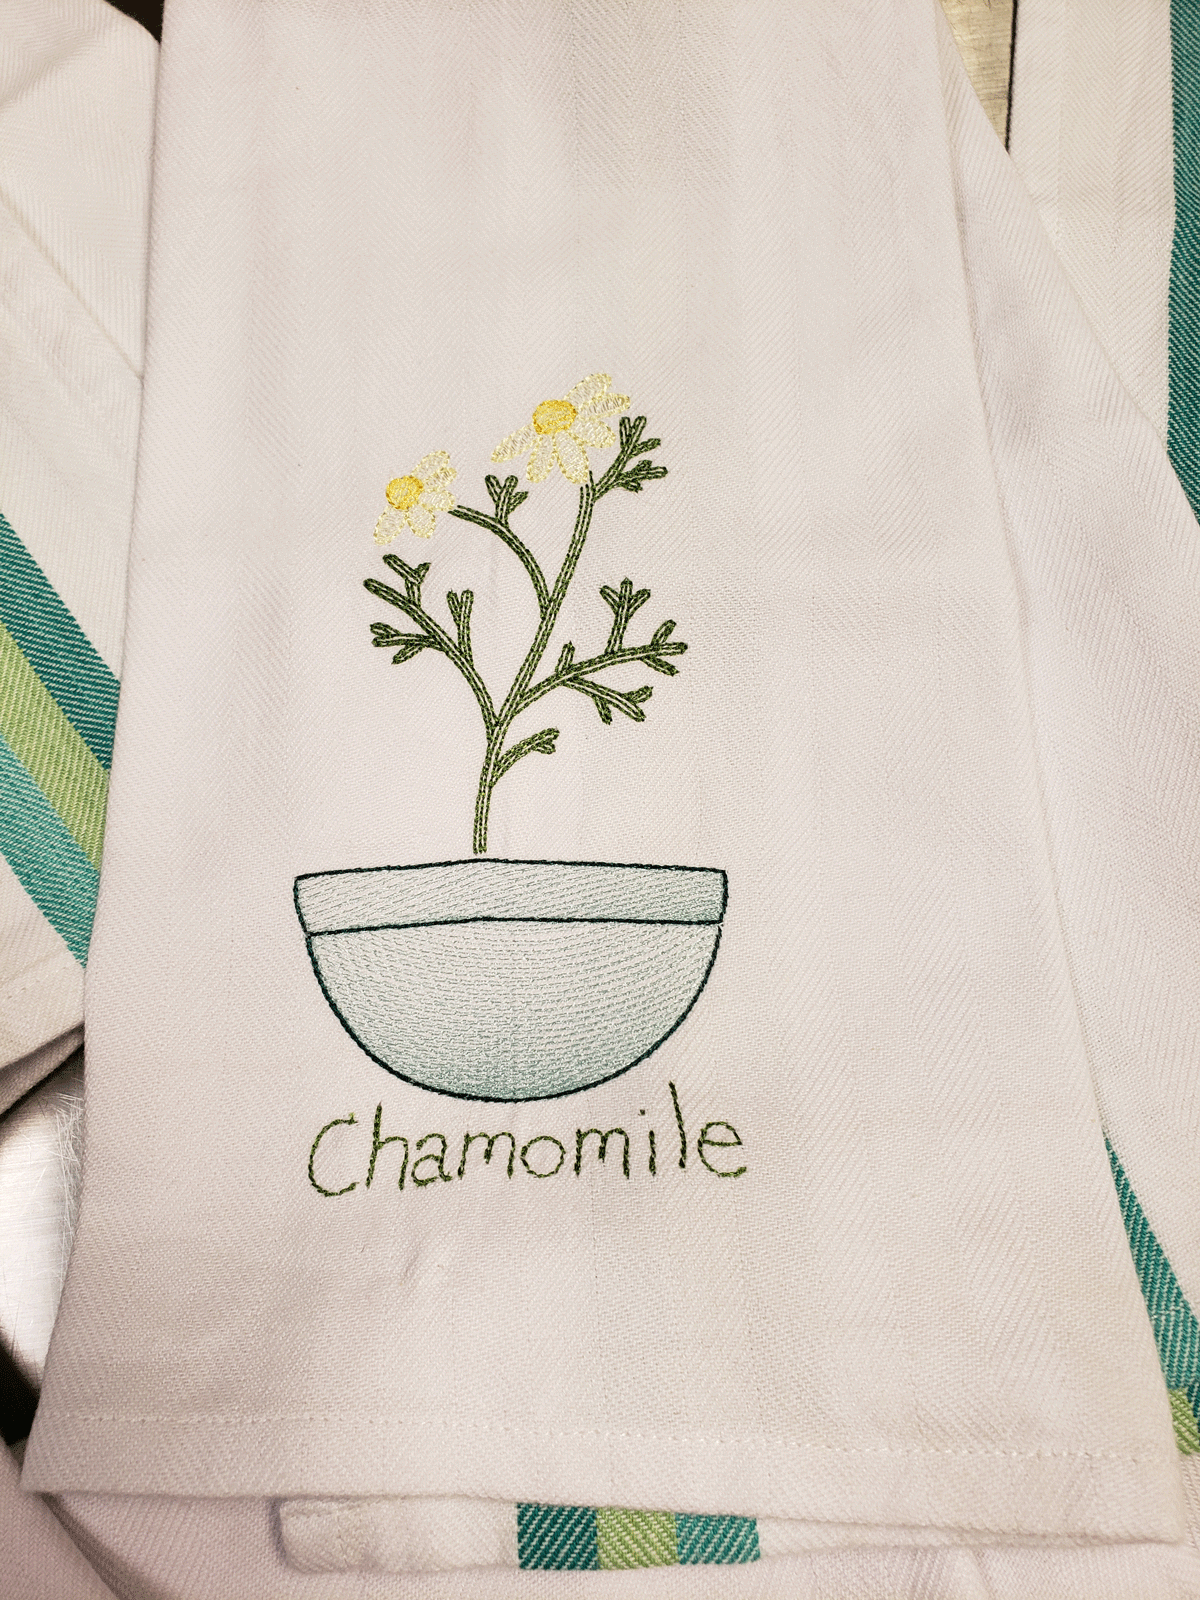 Embroidered Herbs Large Kitchen Towels - Dianne Sews & More